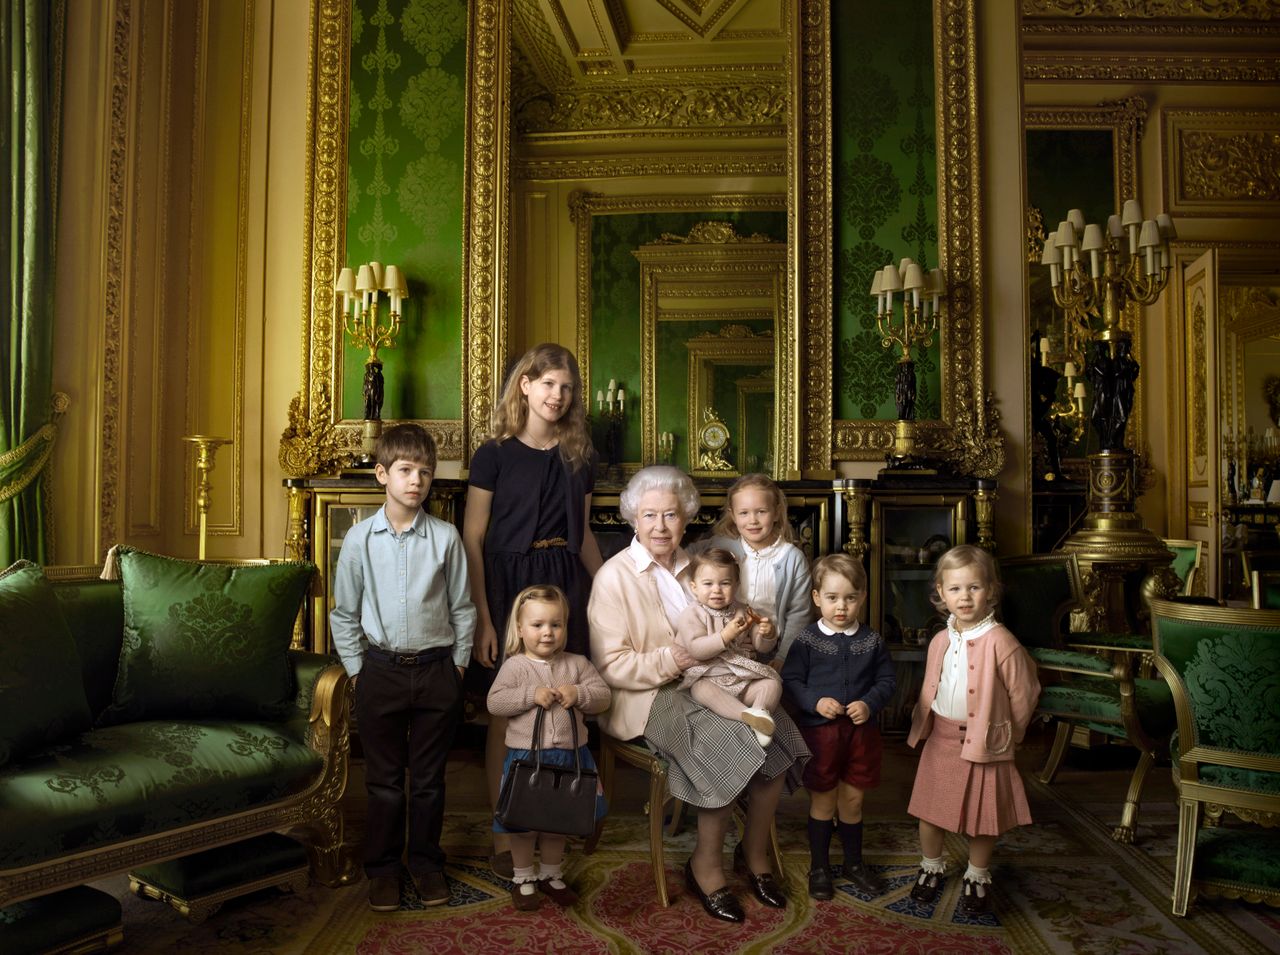 This official photograph, released by Buckingham Palace to mark her 90th birthday, shows Queen Elizabeth II with her five great-grandchildren and her two youngest grandchildren in the Green Drawing Room, part of Windsor Castle's semi-State apartments. The children are: James, Viscount Severn (left), 8, and Lady Louise (second left), 12, the children of The Earl and Countess of Wessex; Mia Tindall (holding The Queen's handbag), the two year-old-daughter of Zara and Mike Tindall; Savannah (third right), 5, and Isla Phillips (right), 3, daughters of The Queen's eldest grandson Peter Phillips and his wife Autumn; Prince George (second right), 2, and in The Queen's arms and in the tradition of Royal portraiture, the youngest great-grandchild, Princess Charlotte (11 months), children of The Duke and Duchess of Cambridge.